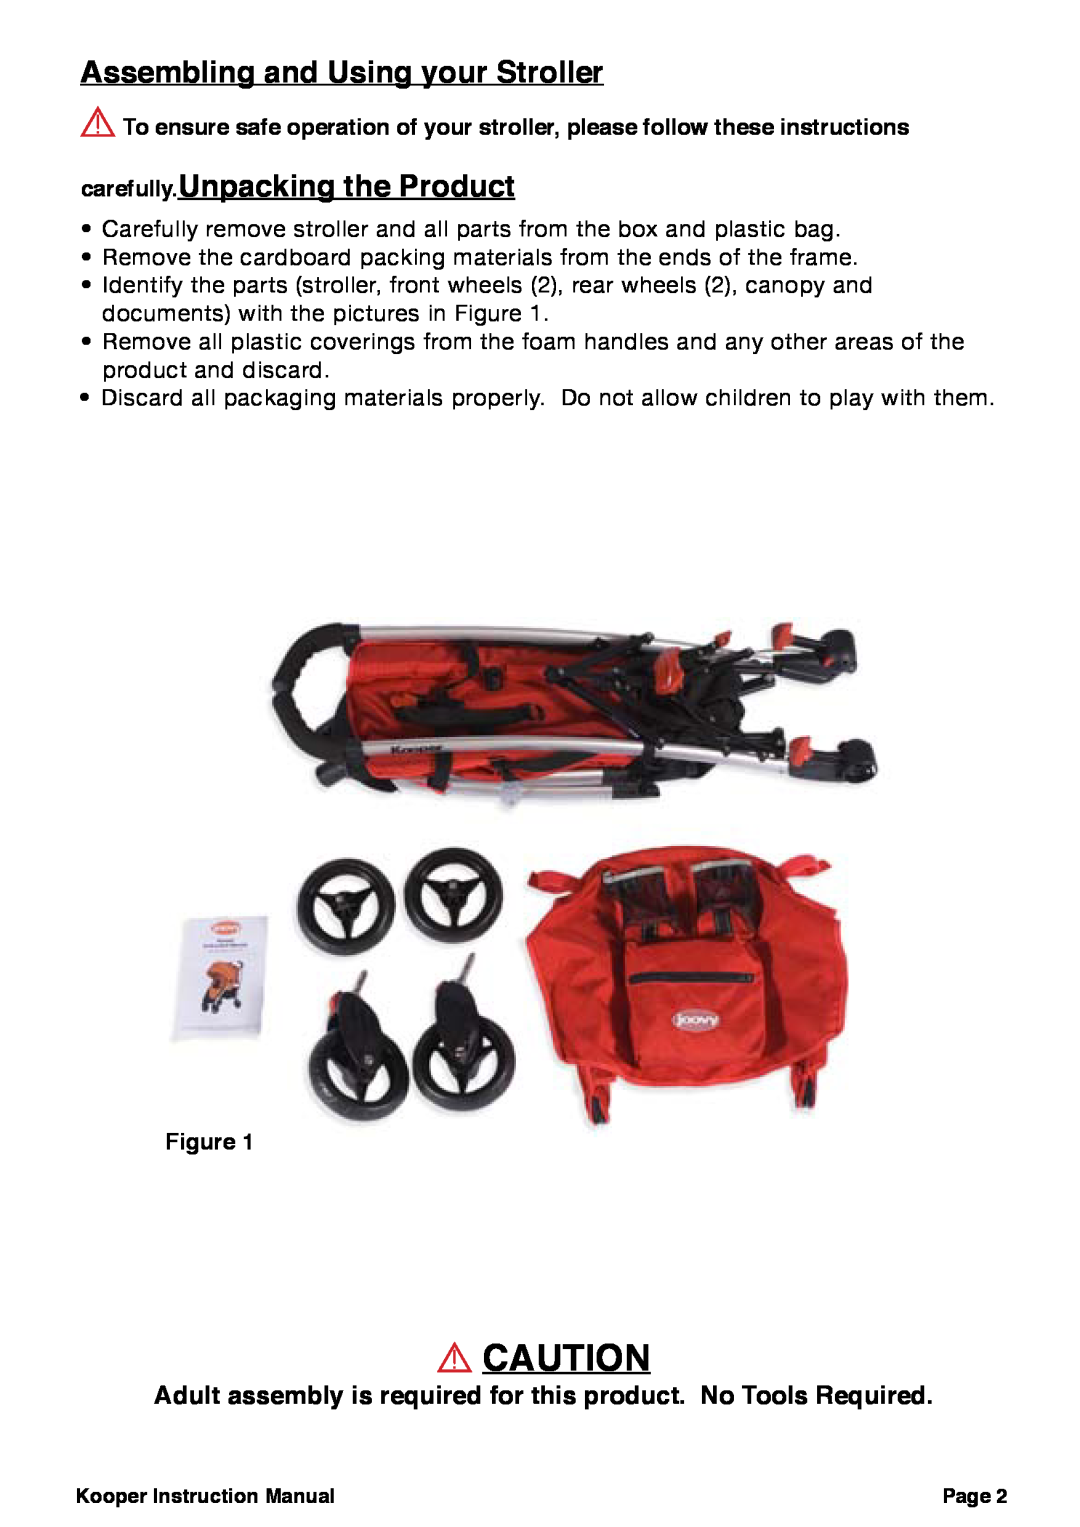 Joovy 30X Series, Joovy Kooper manual Assembling and Using your Stroller, carefully.Unpacking the Product 